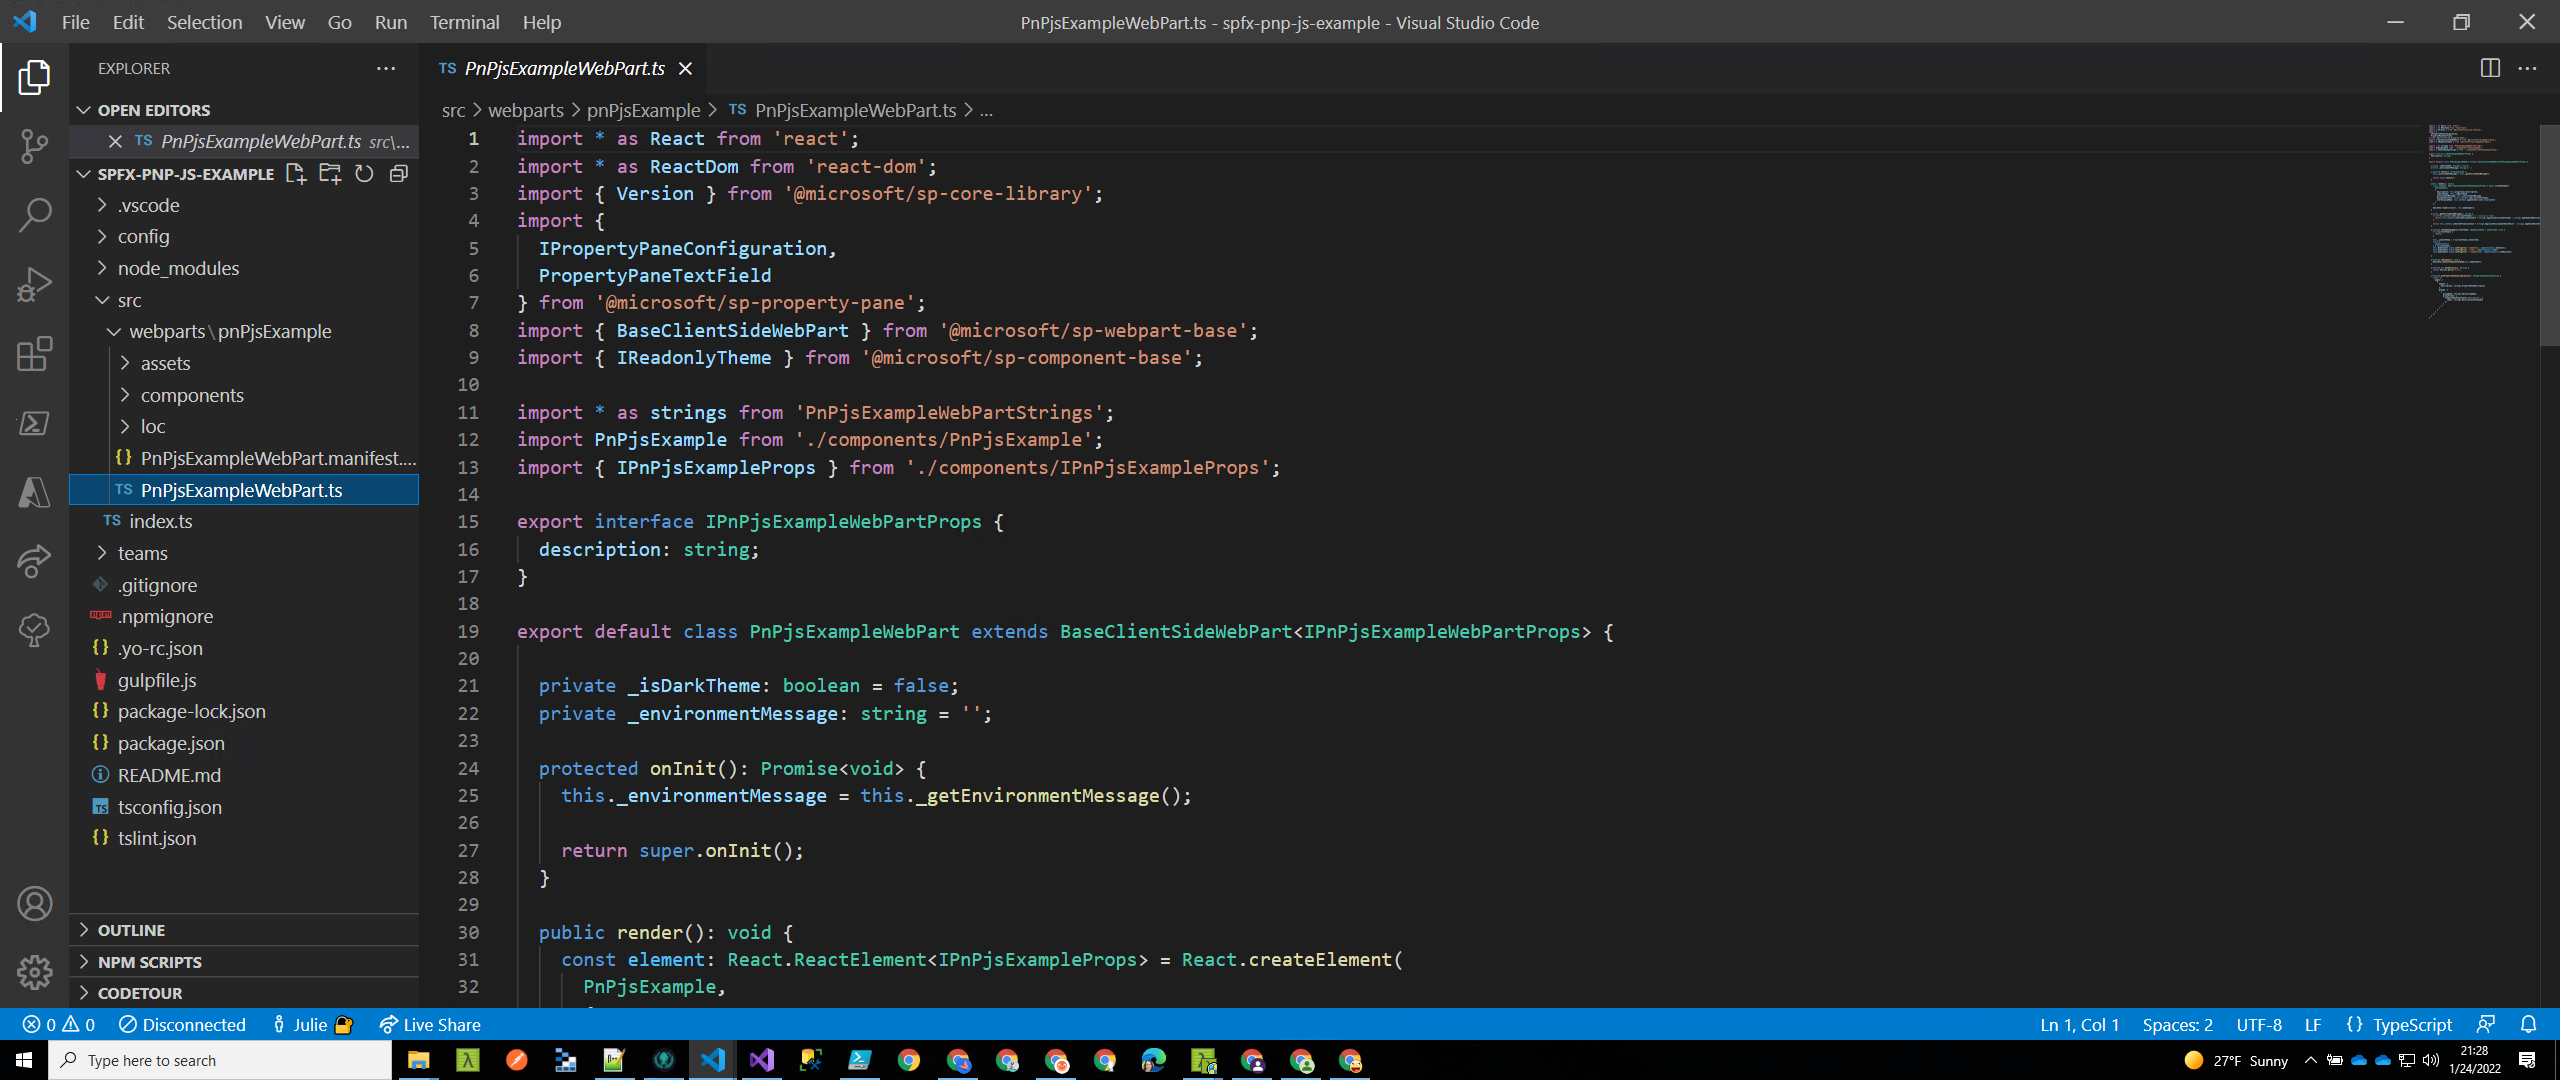 Project as first opened in Visual Studio Code